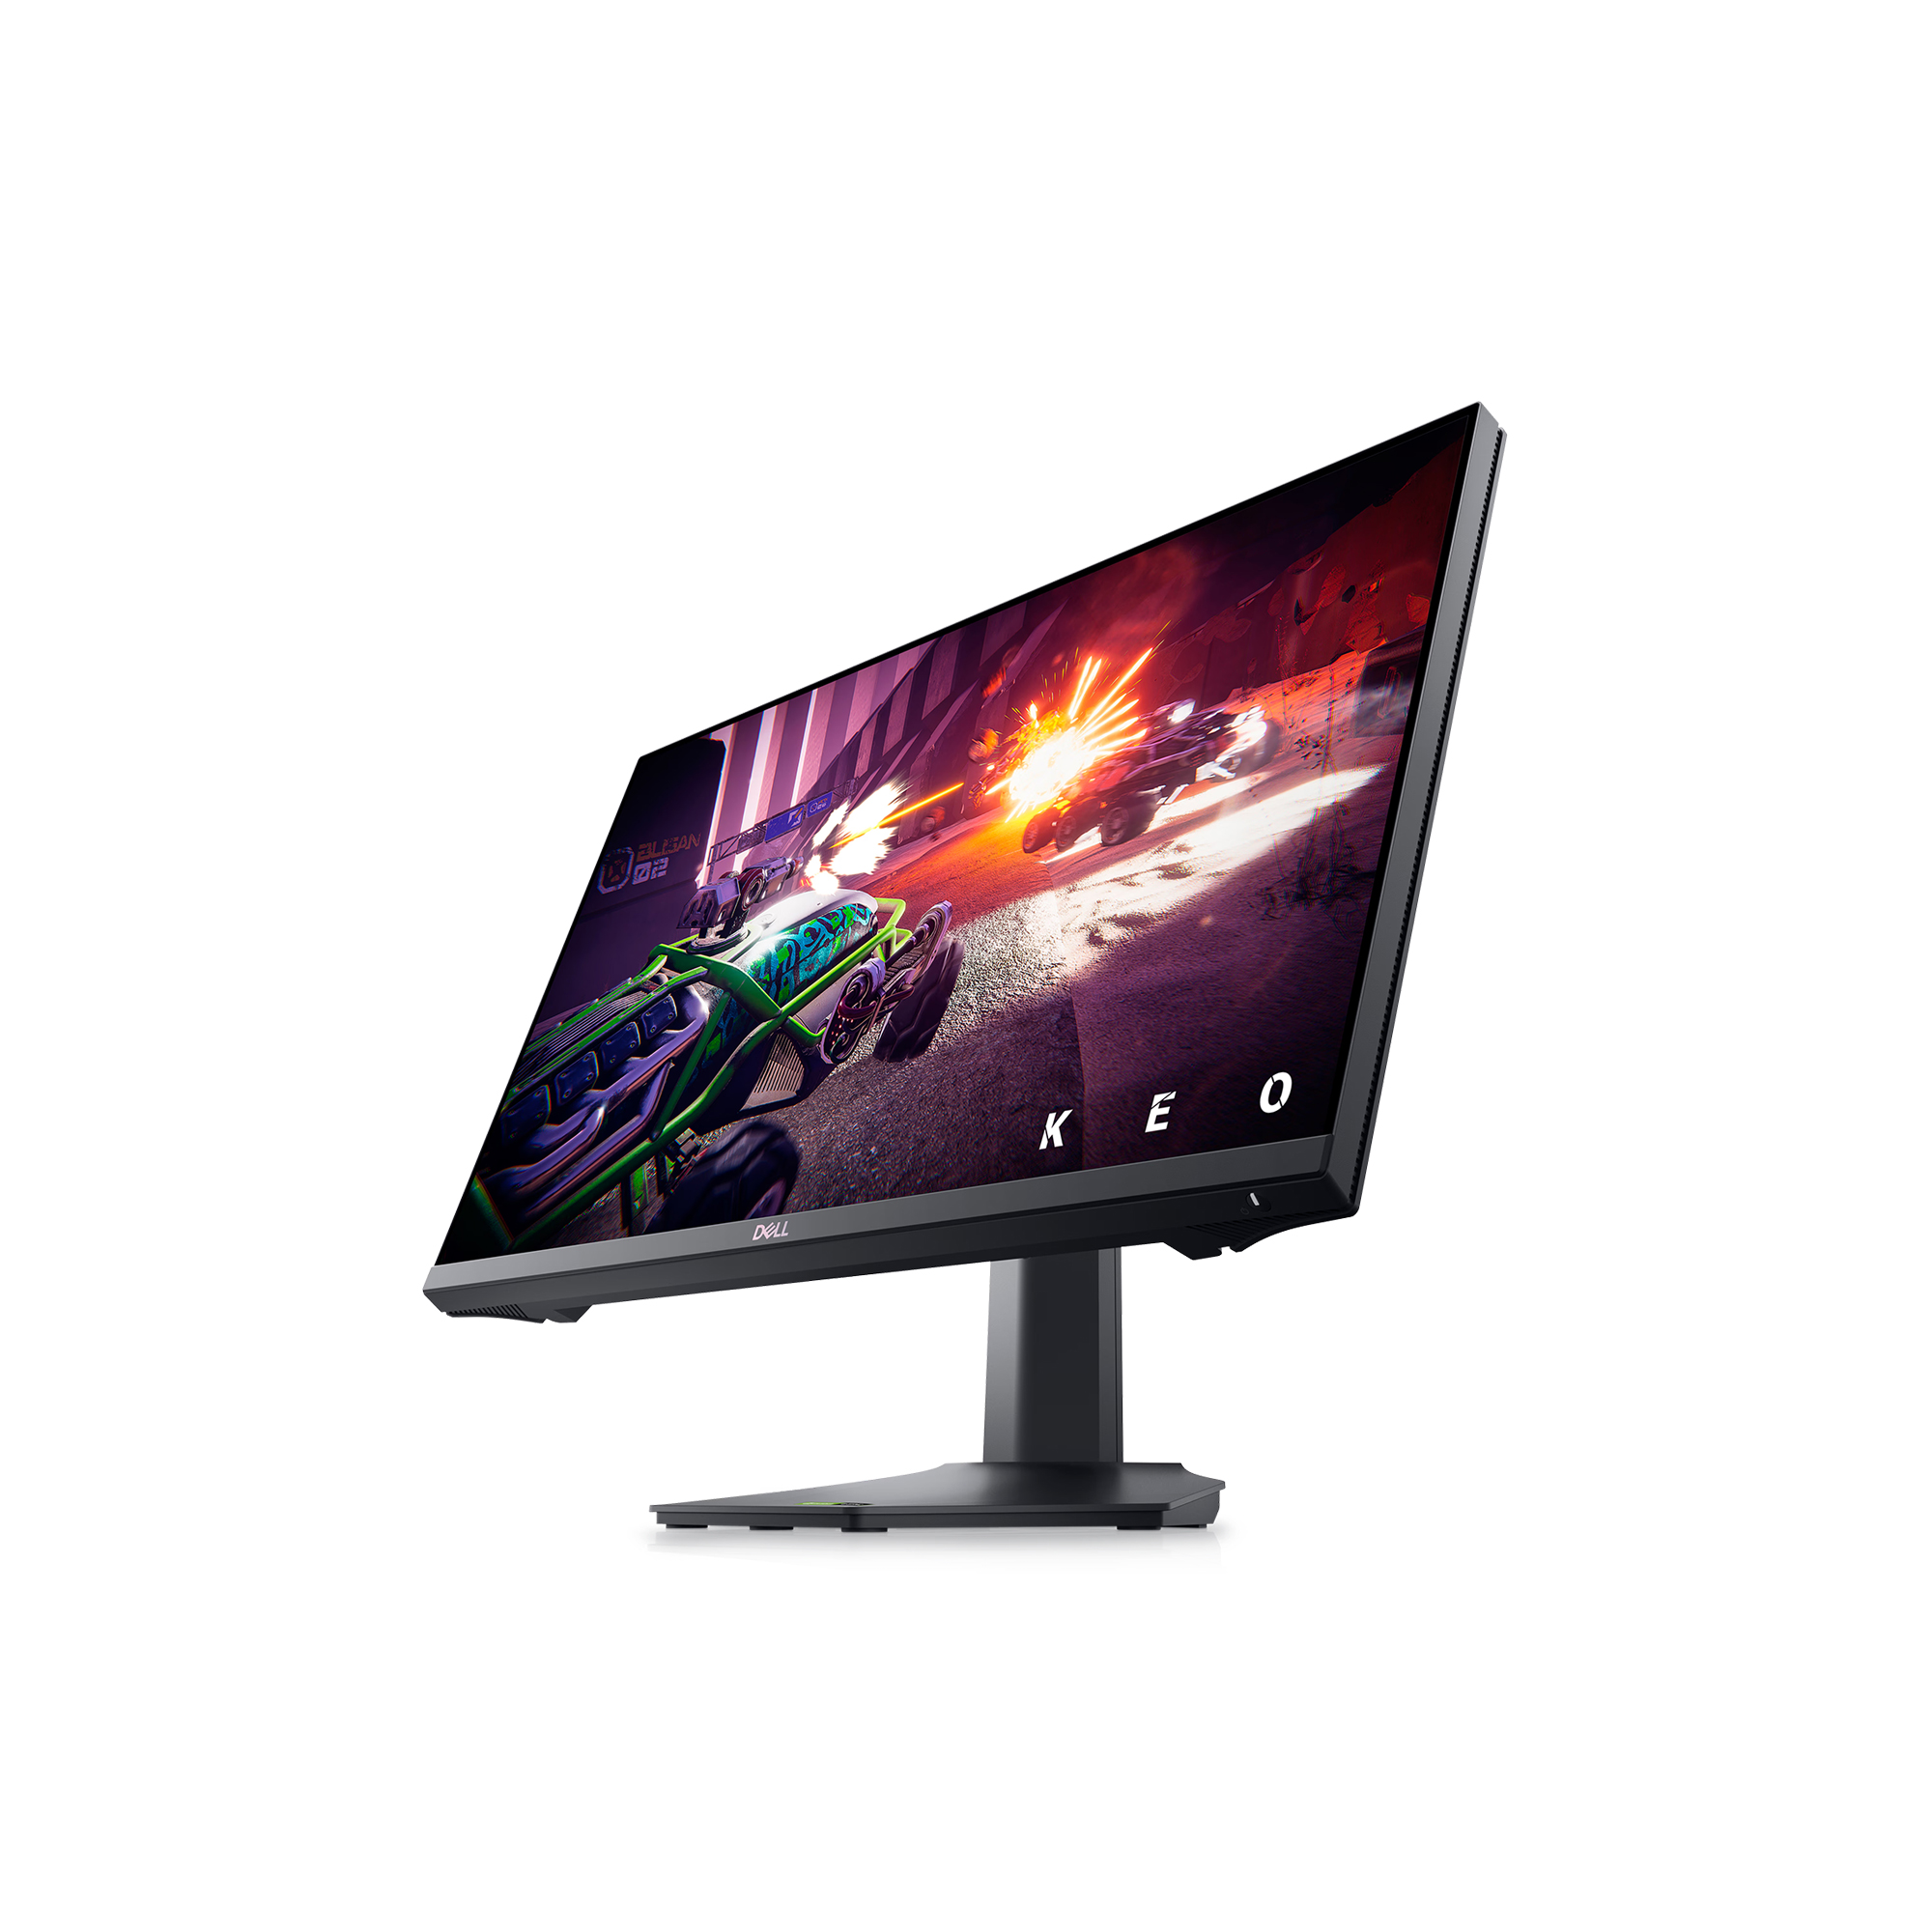 Monitor 24'' Dell G2422HS